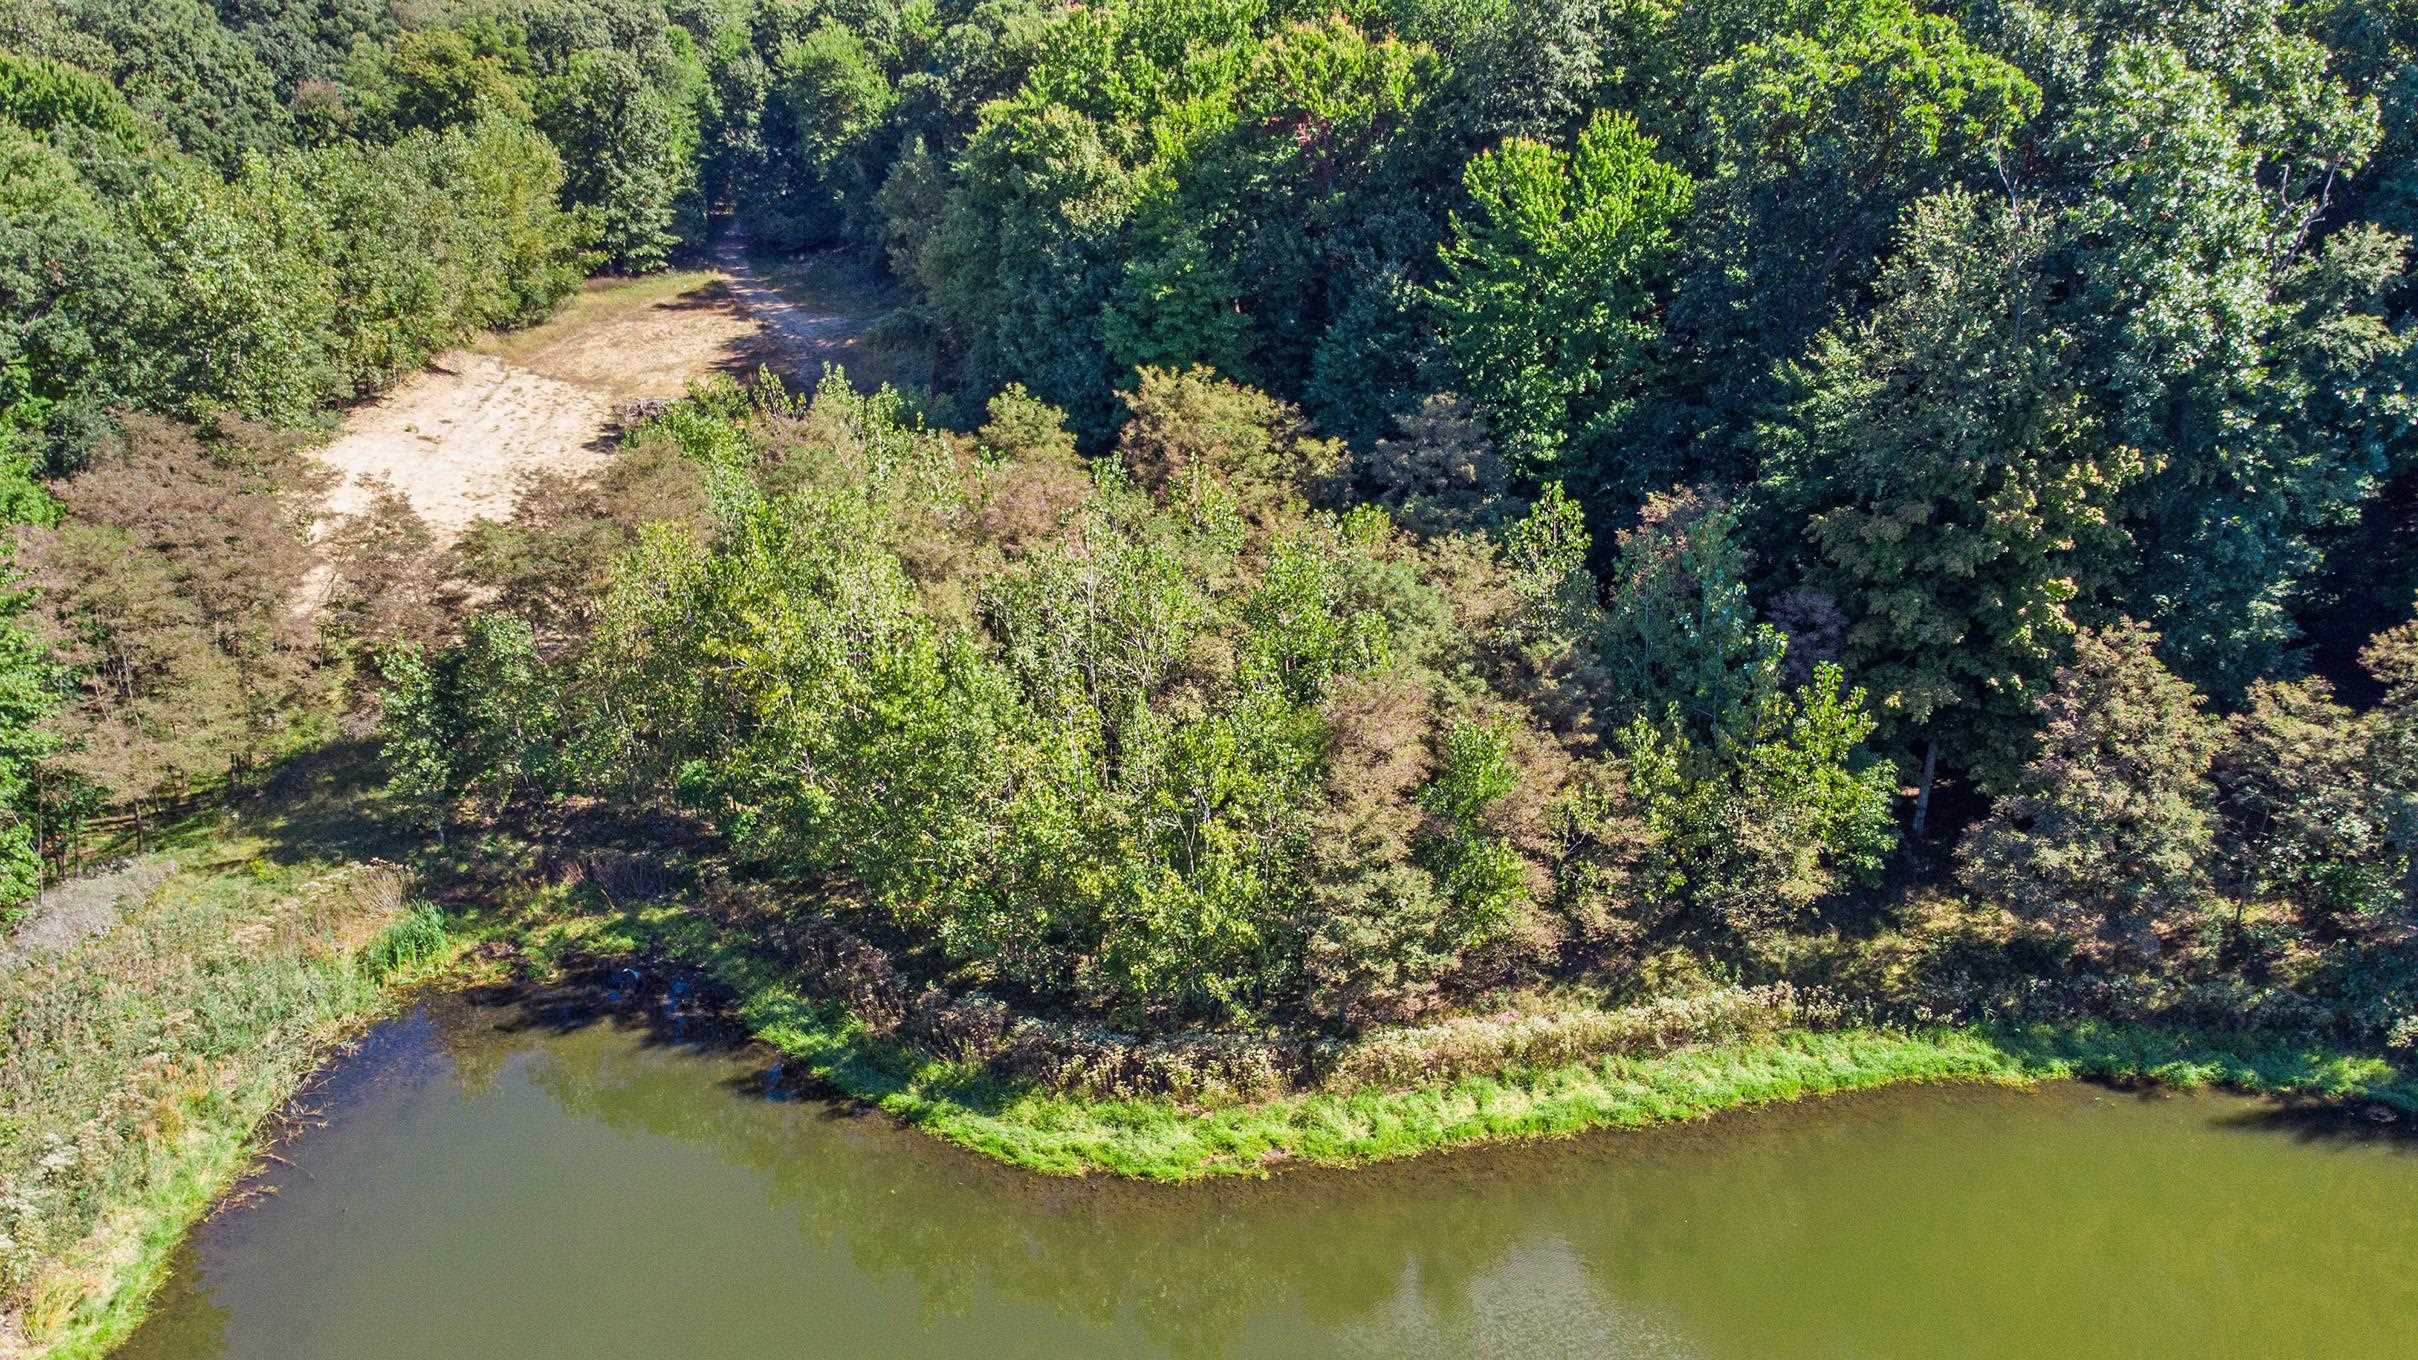 Lot 4 Persimmon Drive, South Bend, IN 46628